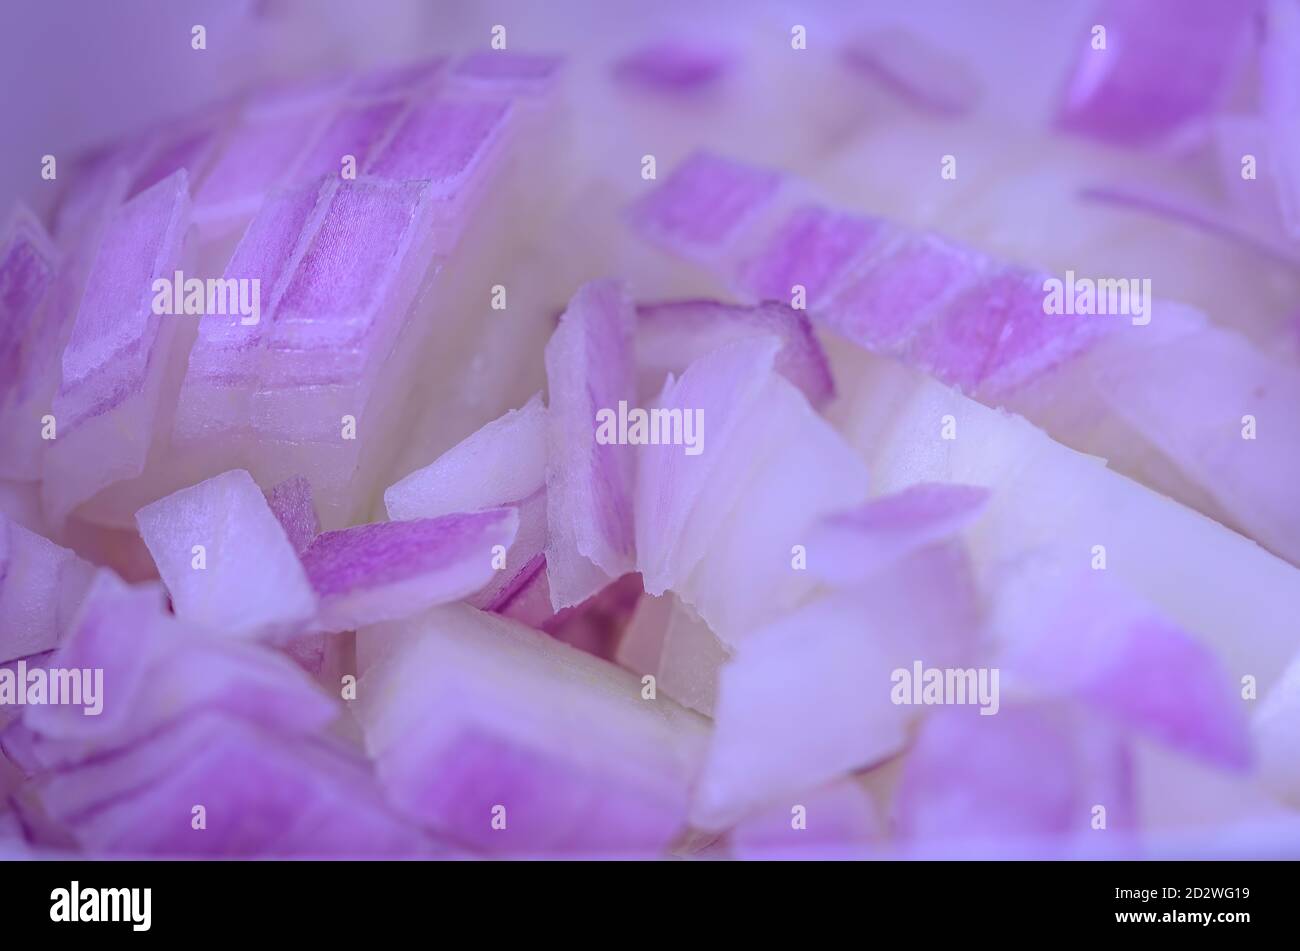 Closeup of finely chopped onions background in purple color Stock Photo